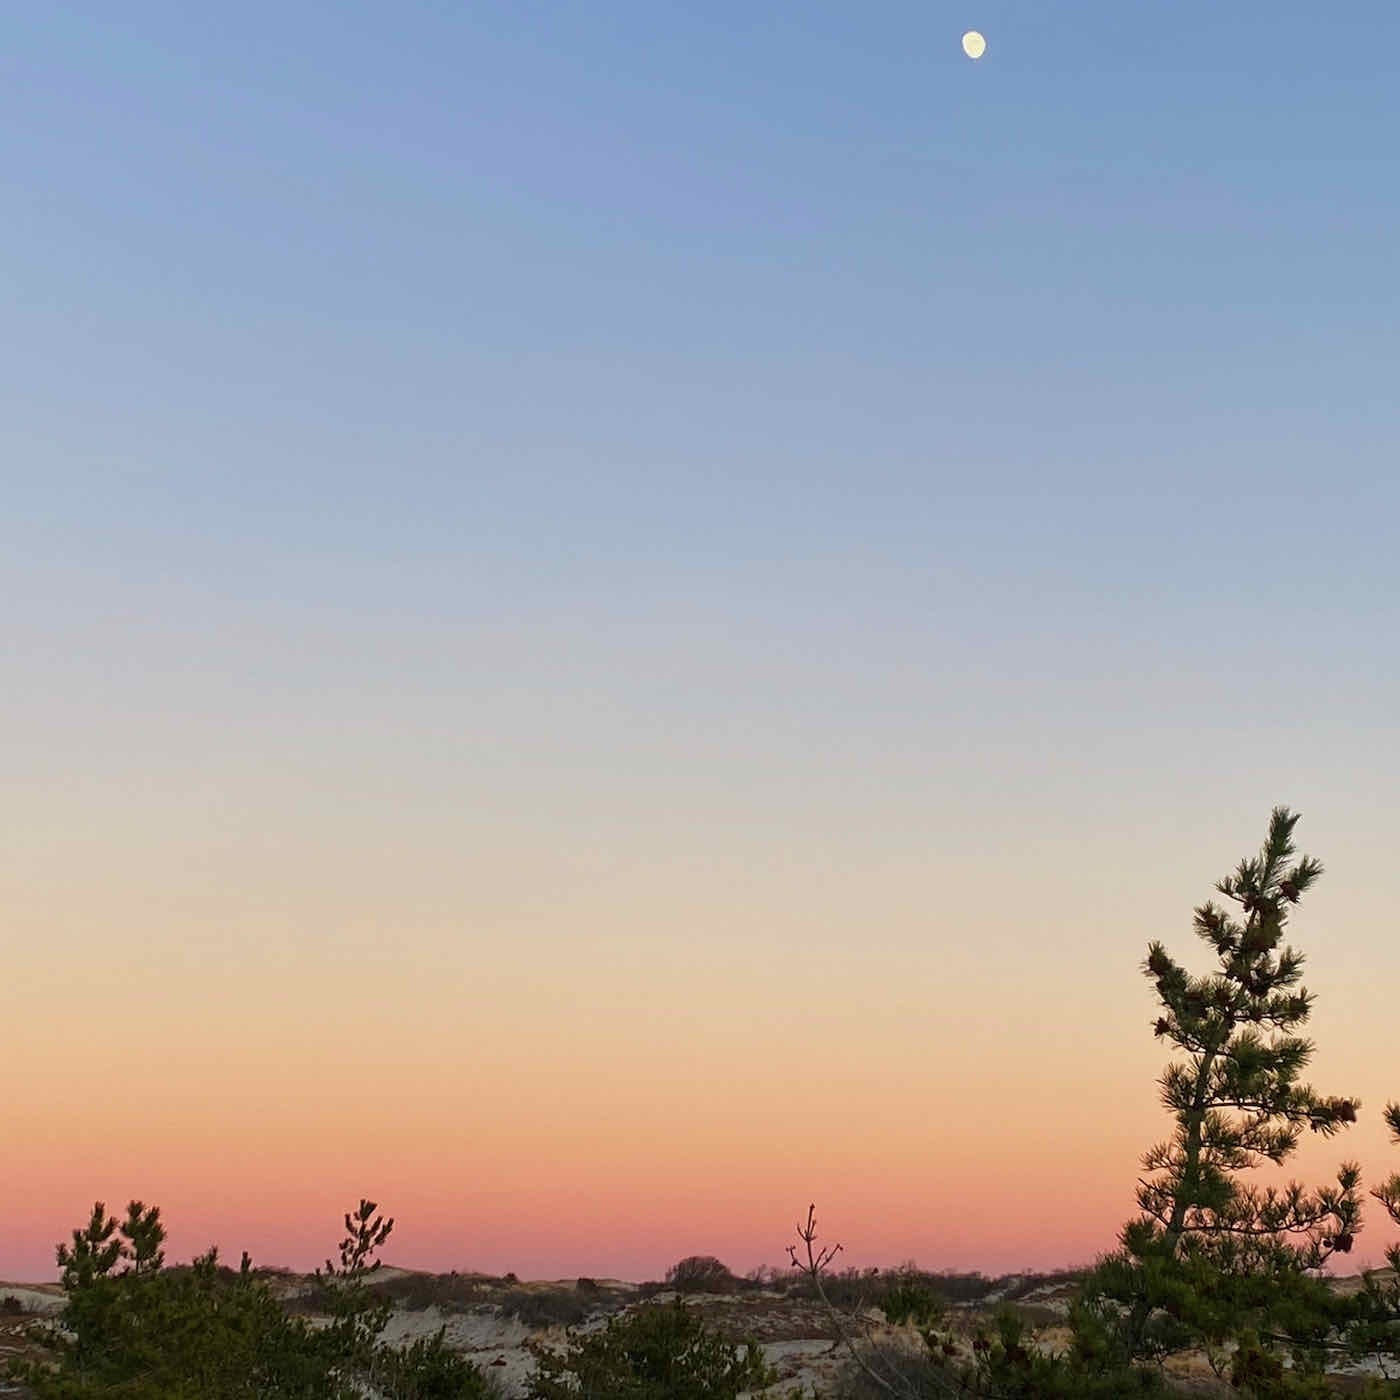 A twilight sky, with the moon present and the colors ranging from blue to deep pink over the dunes in Massachusetts